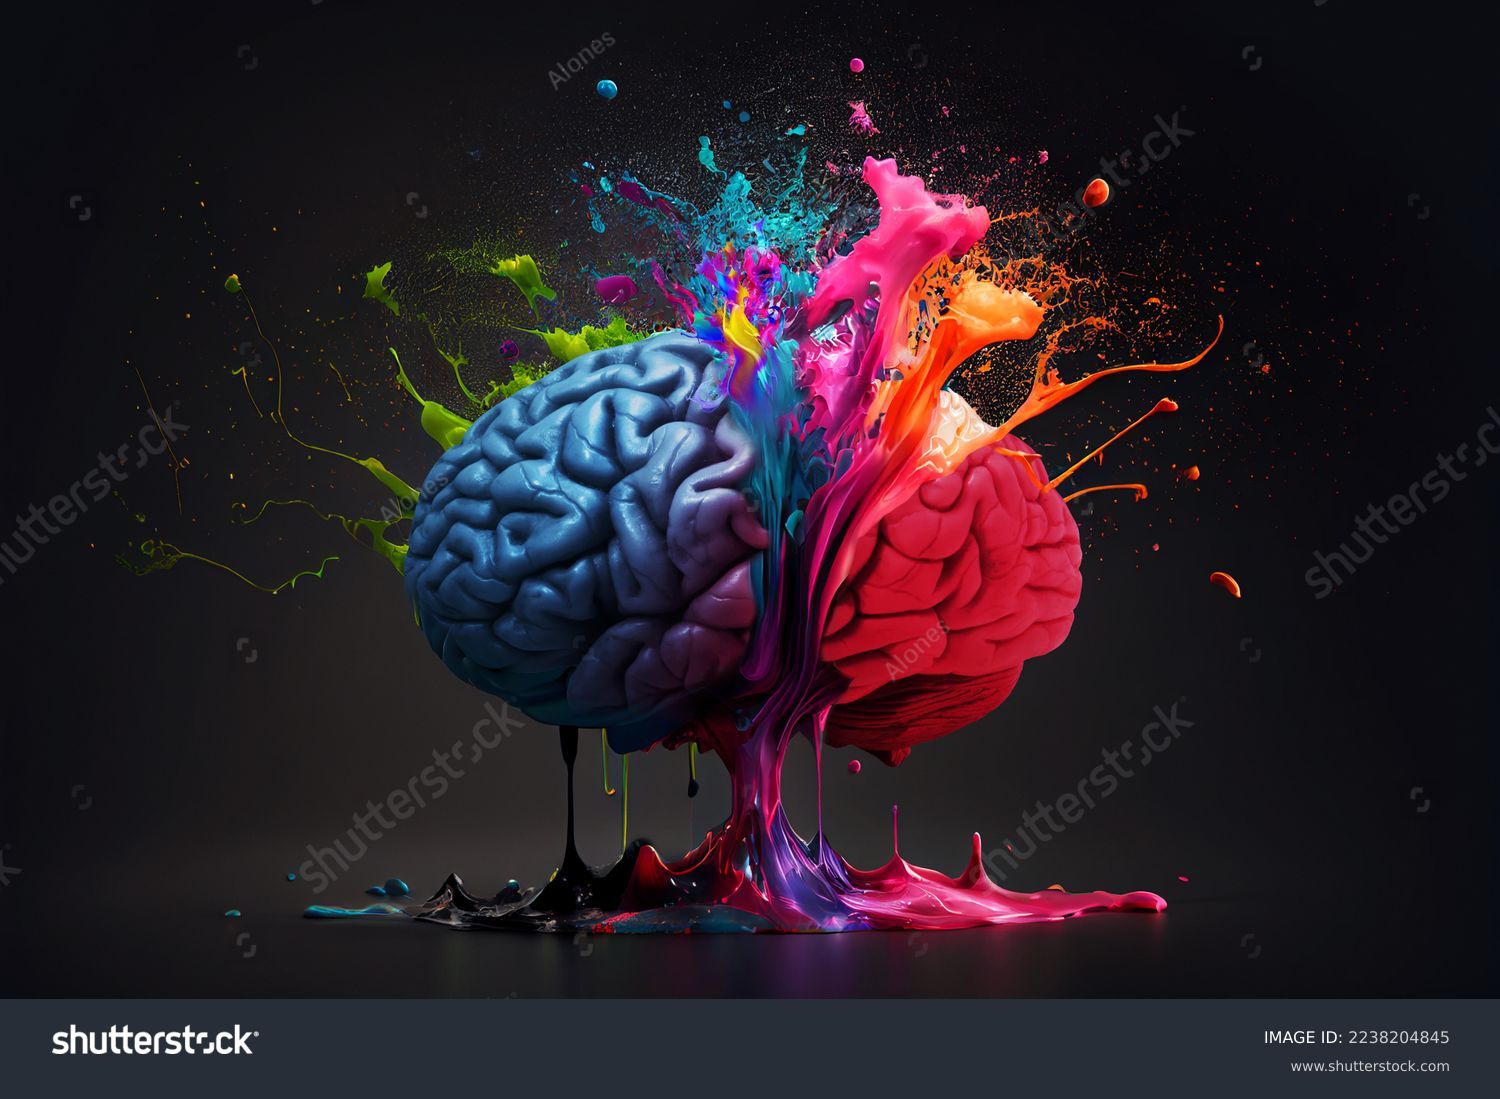 Creative art brain explodes with paints with splashes on a black background, concept idea #2238204845